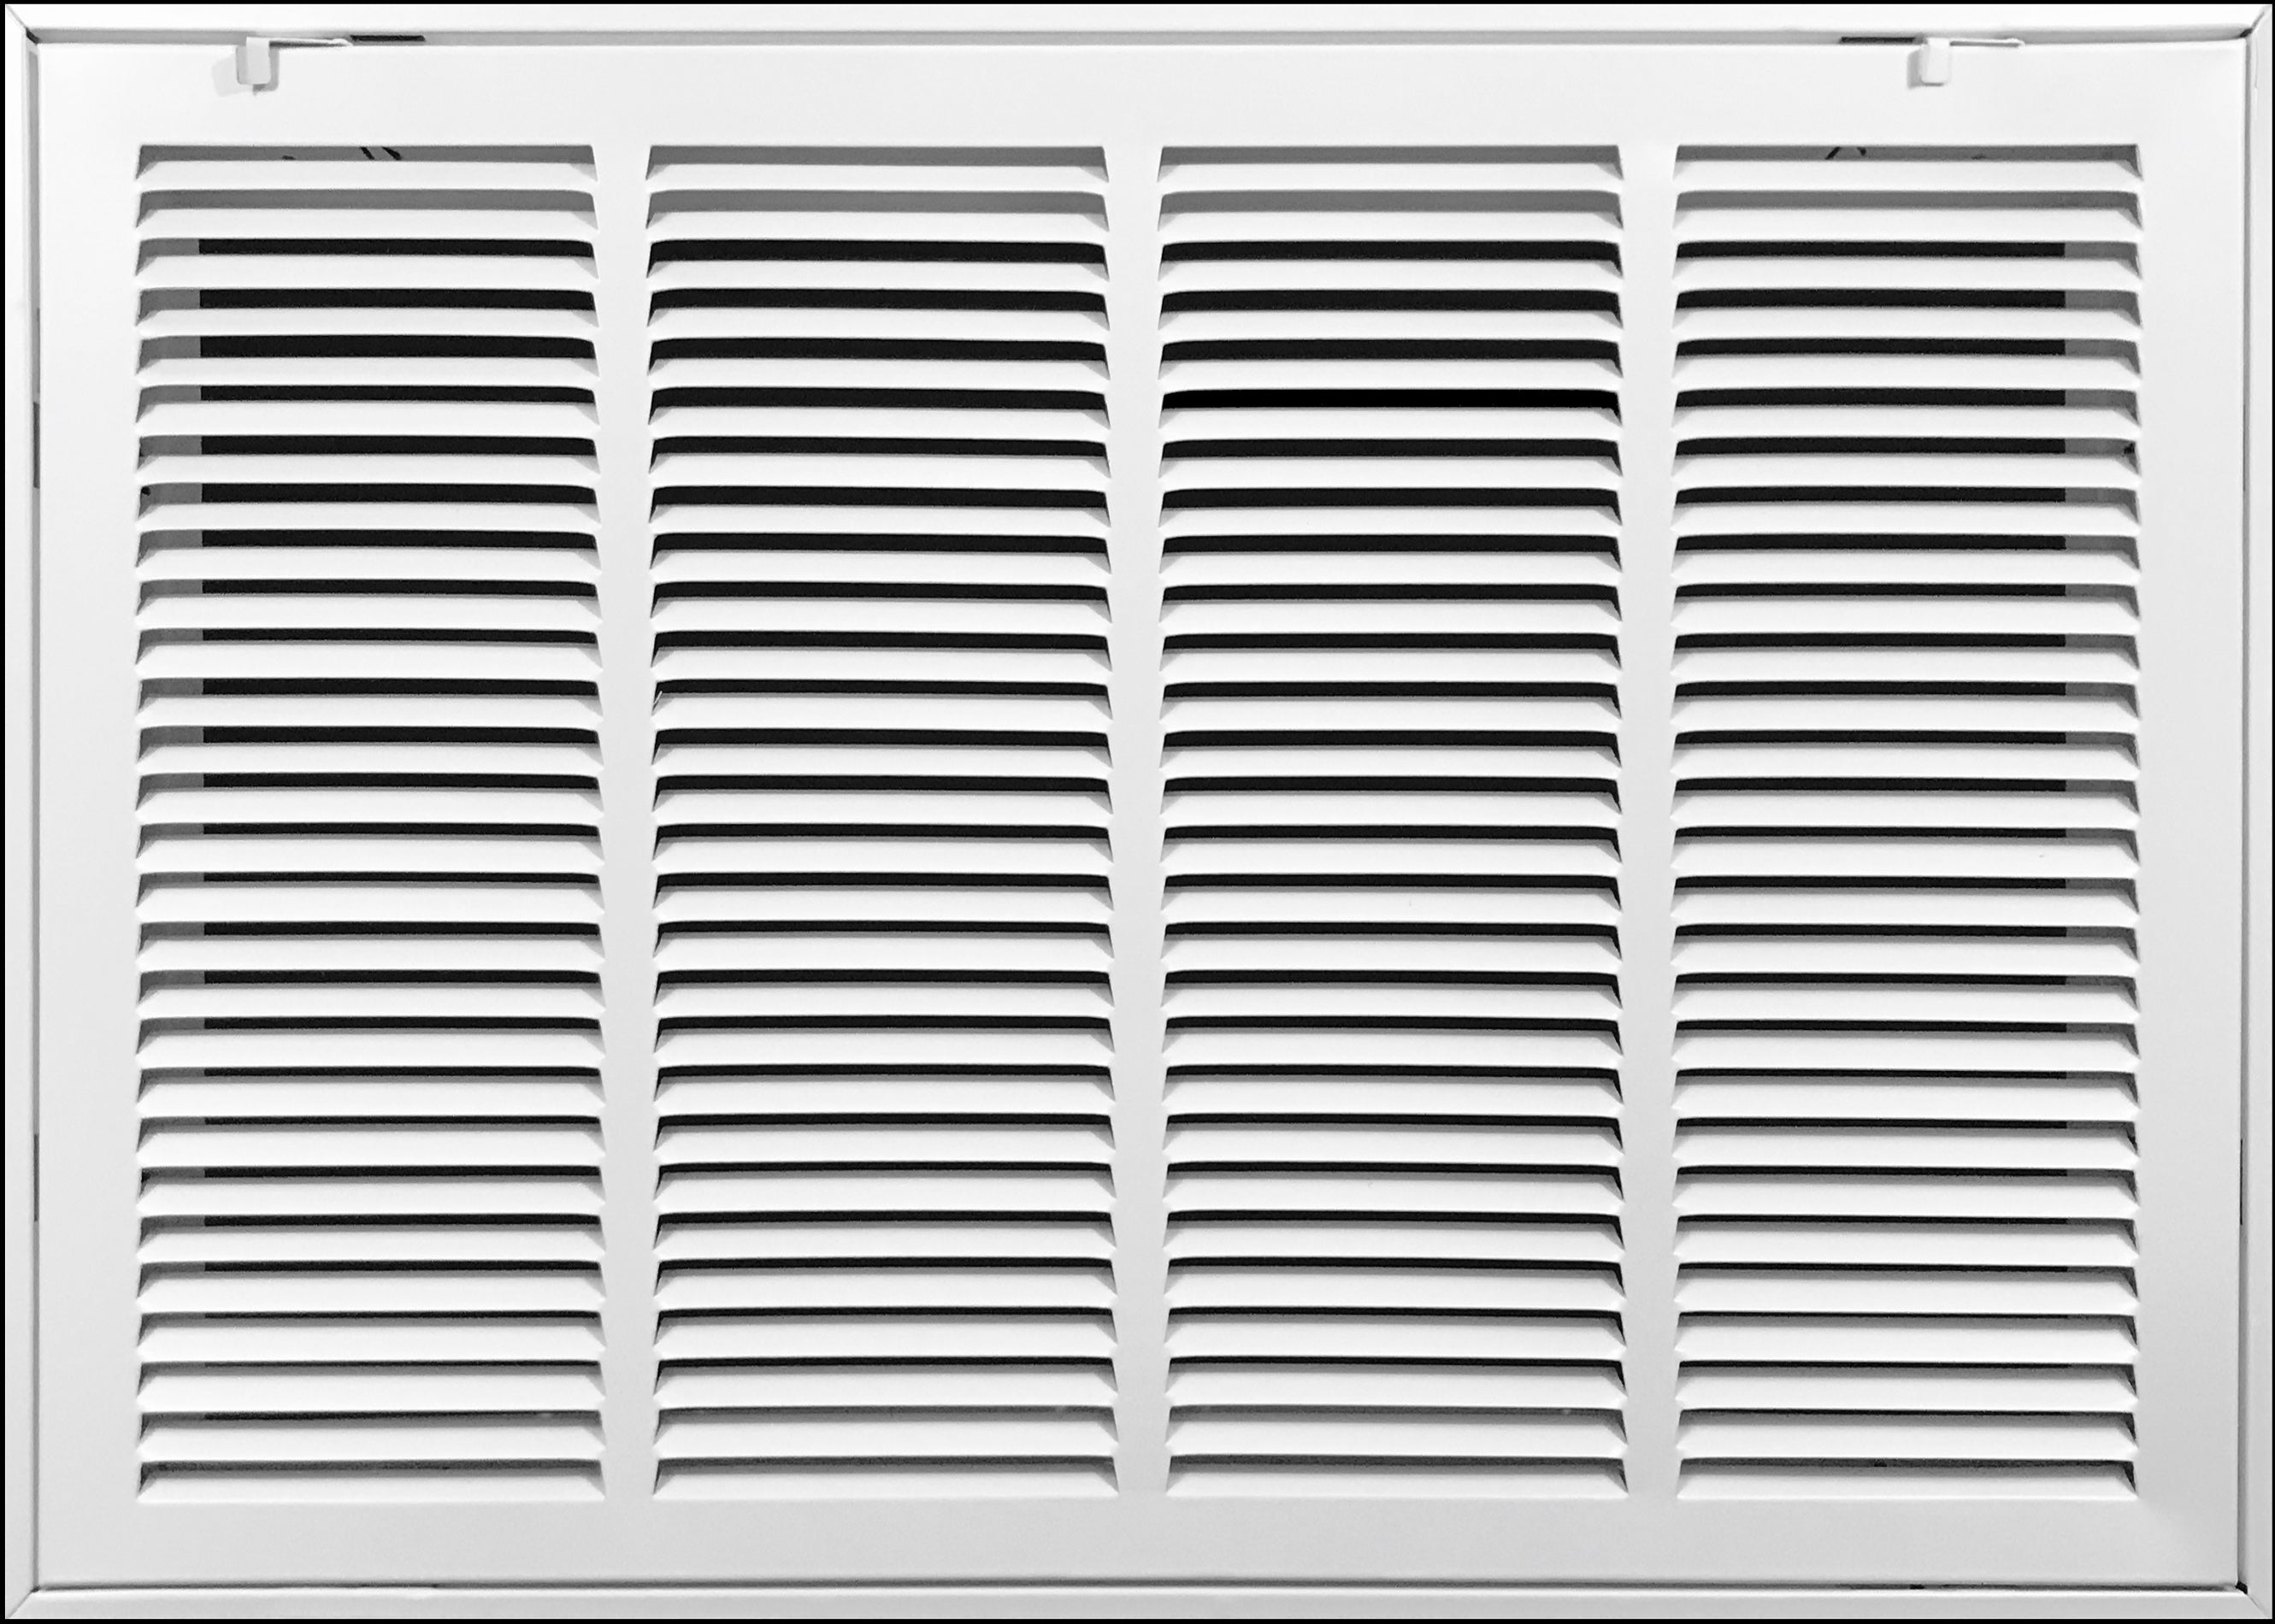 airgrilles 24" x 14" duct opening   hd steel return air filter grille for sidewall and ceiling  agc  7agc-1raf-wh-24x14 756014649475 - 1